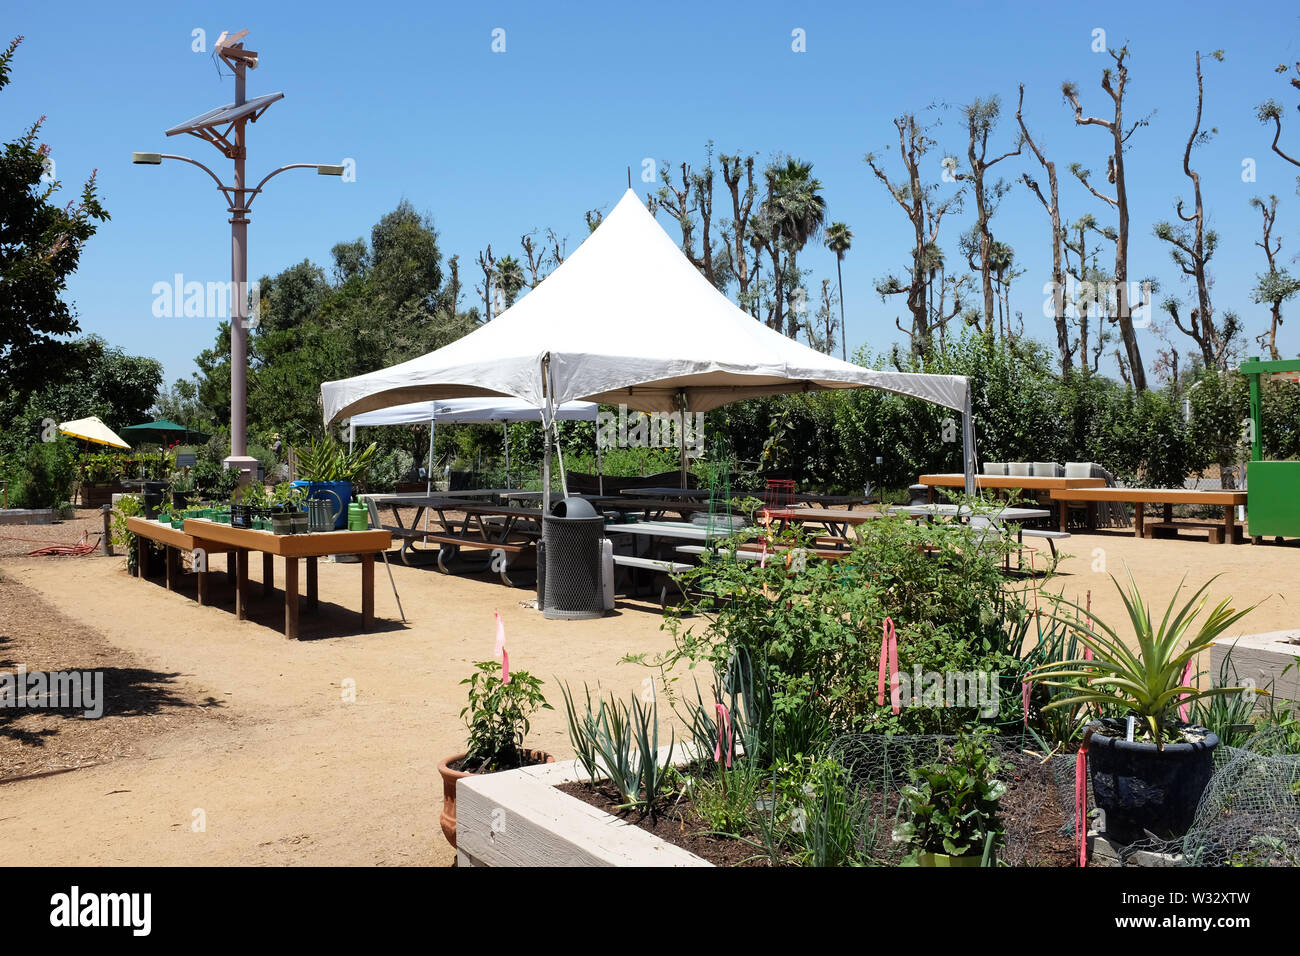 IRIVNE, CALIFORNIA - JULY 11, 2019: Great Park Farm and Food Lab. A one acre plot in Irvine's Great Park established as a demonstration of sustainable Stock Photo